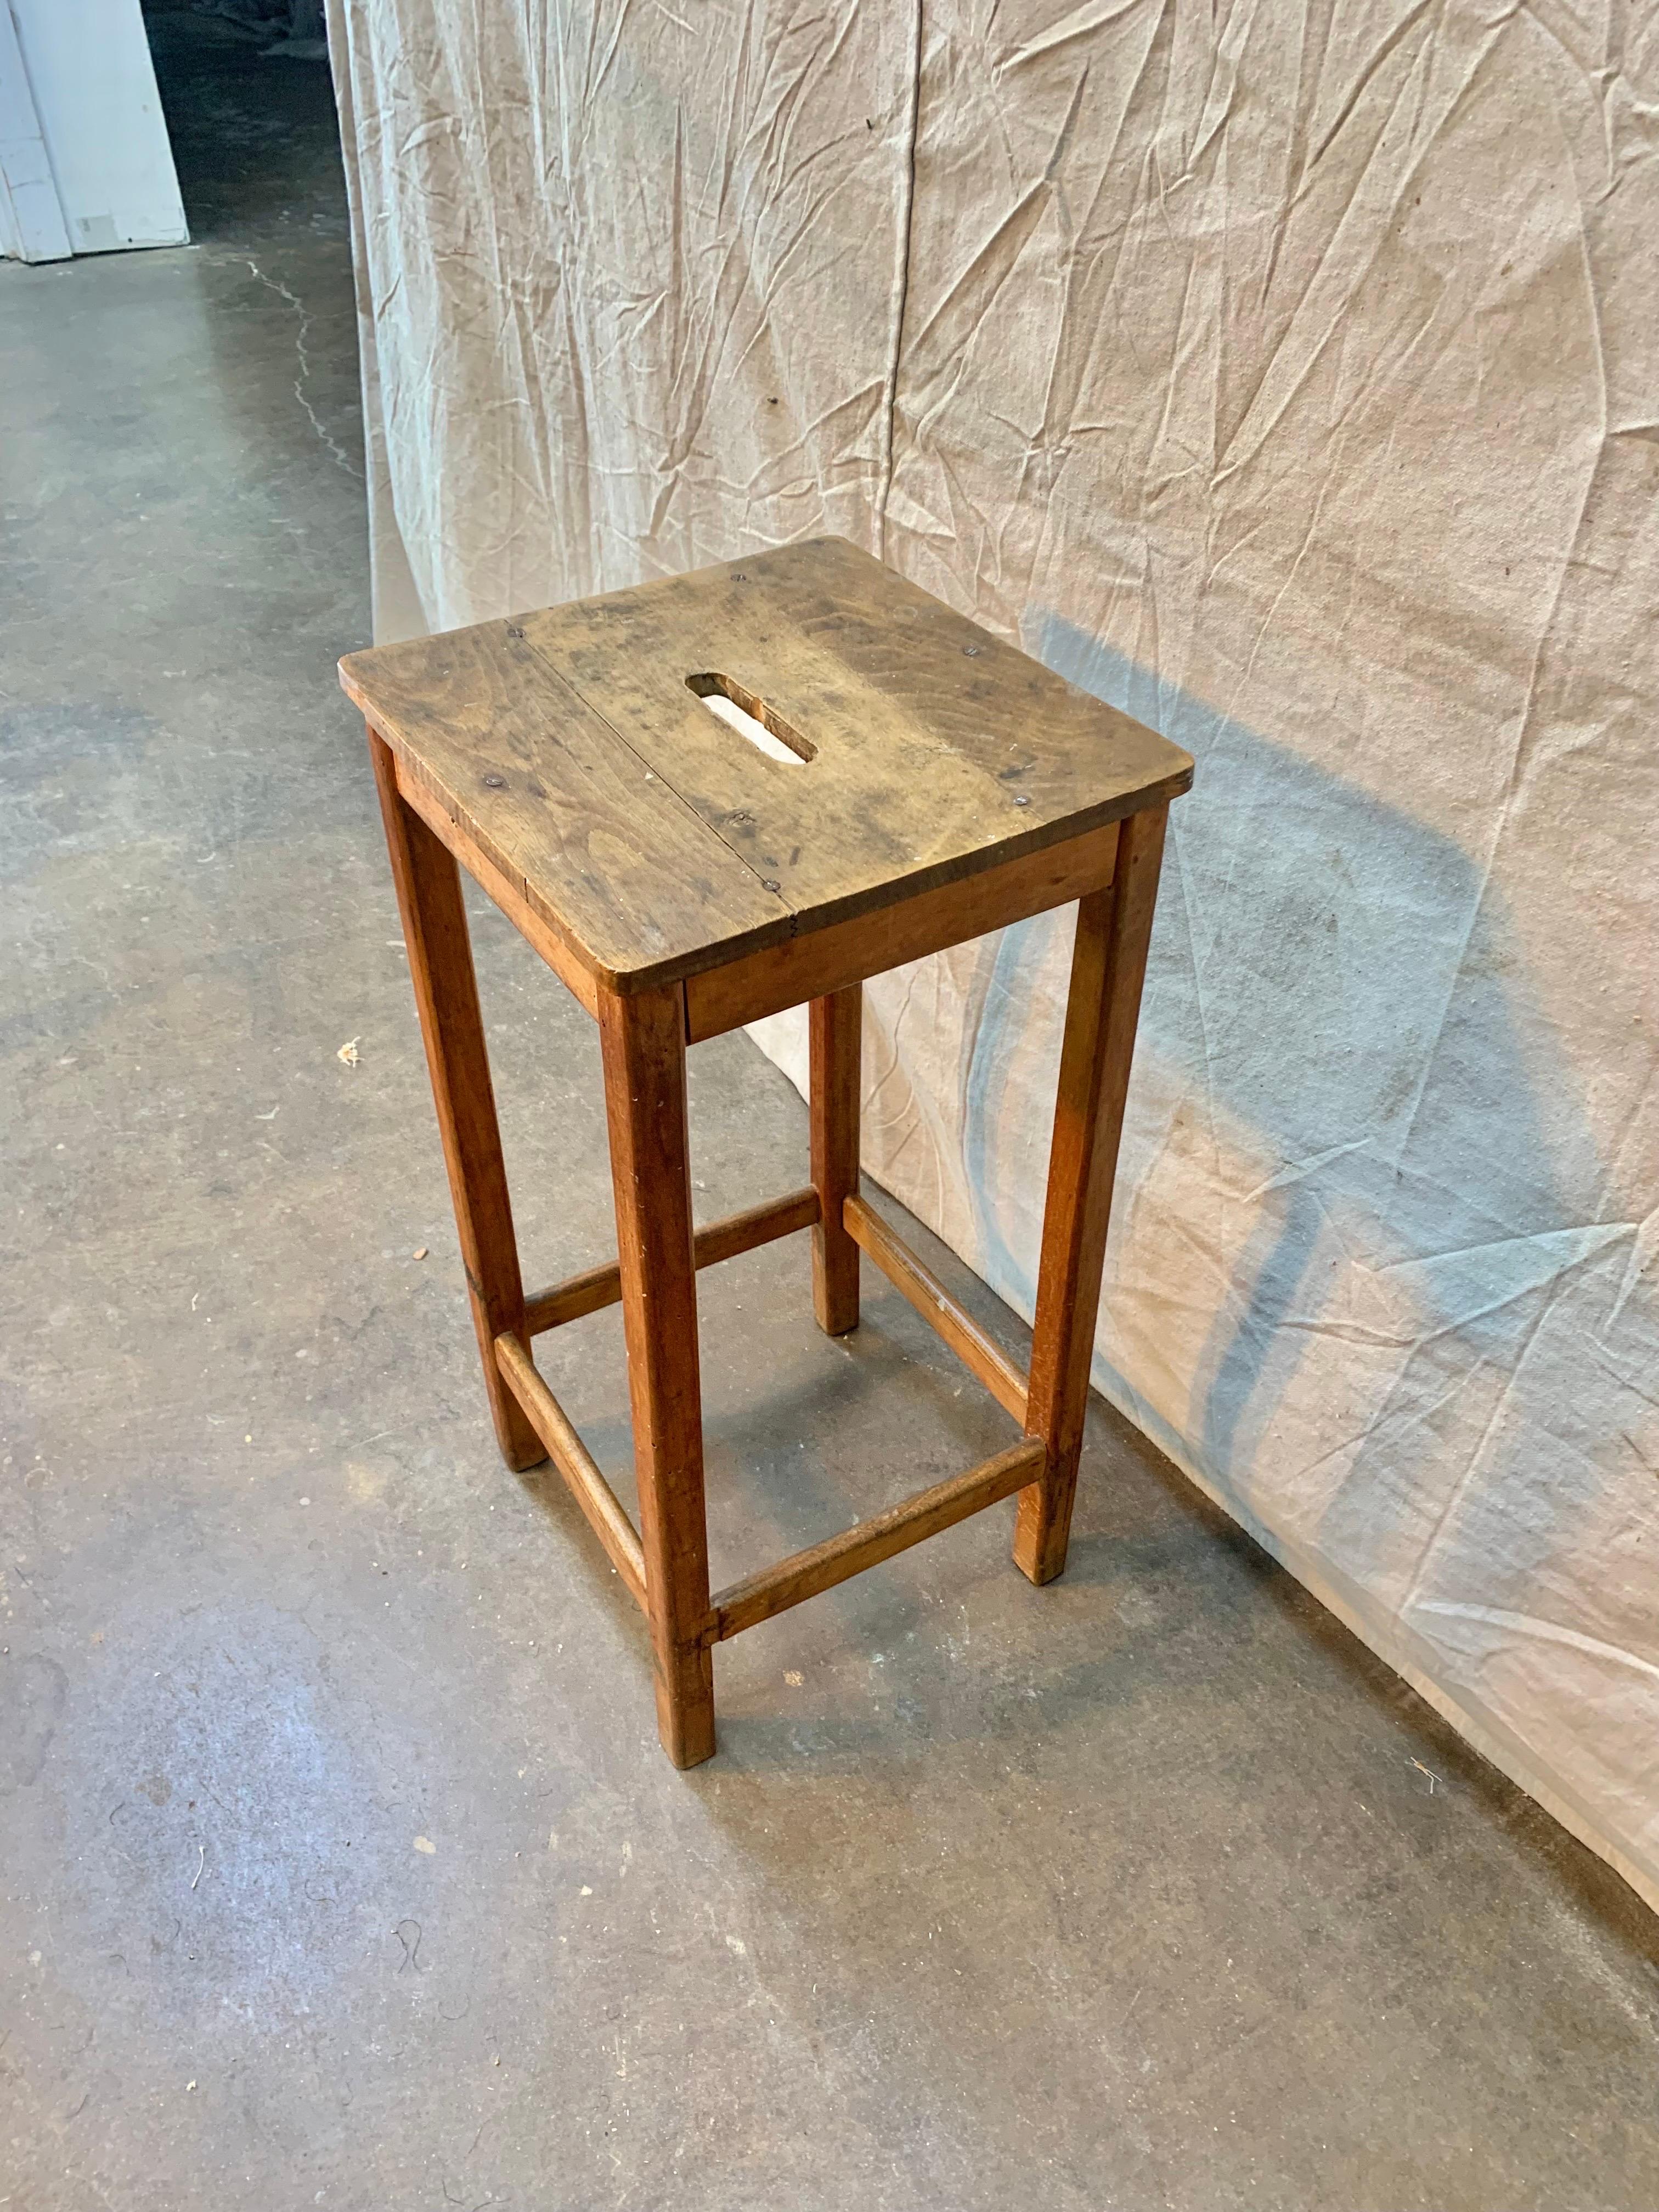 Early 1900s French Pine Train Station Stool In Good Condition For Sale In Burton, TX